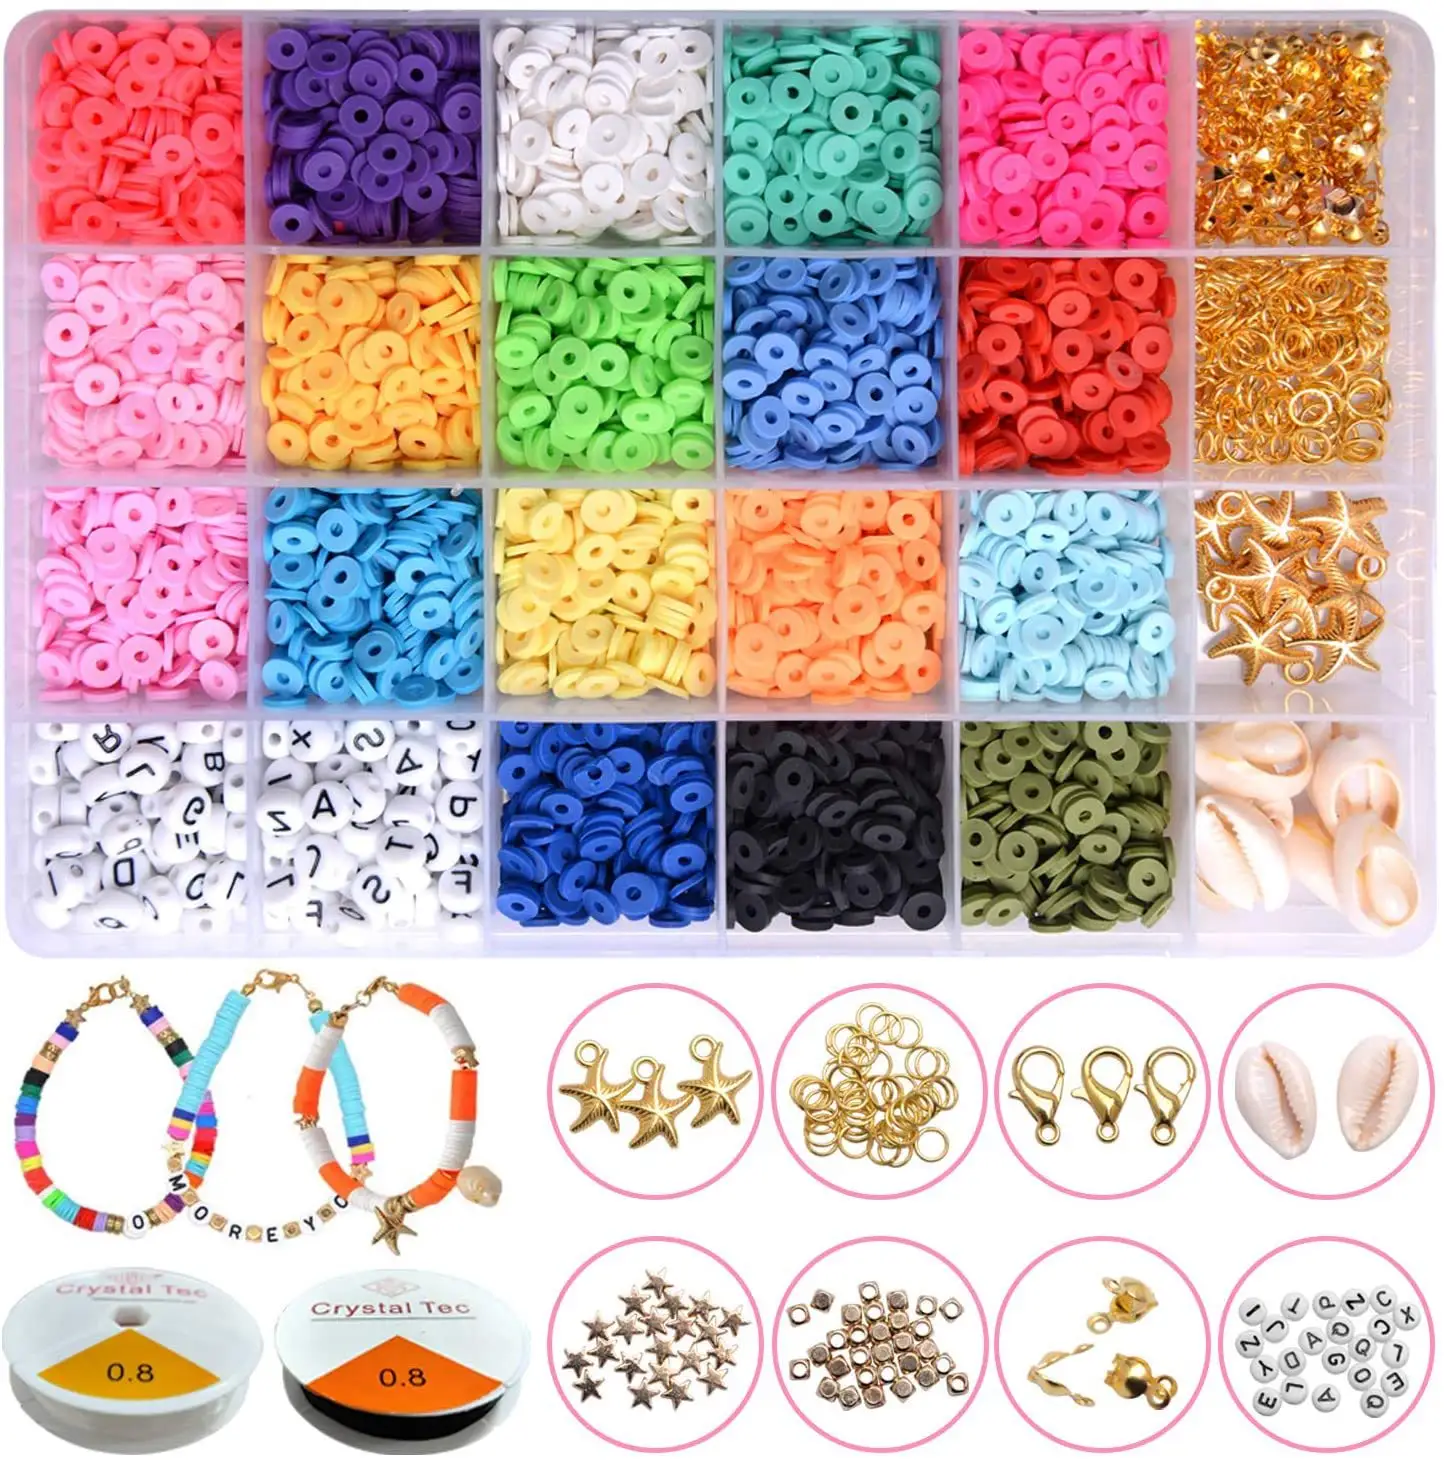 4000 Pcs Clay Beads 6mm 20 Colors Flat Round Polymer Clay Spacer Beads with Pendant Charms Kit and 4 Roll Elastic Strings